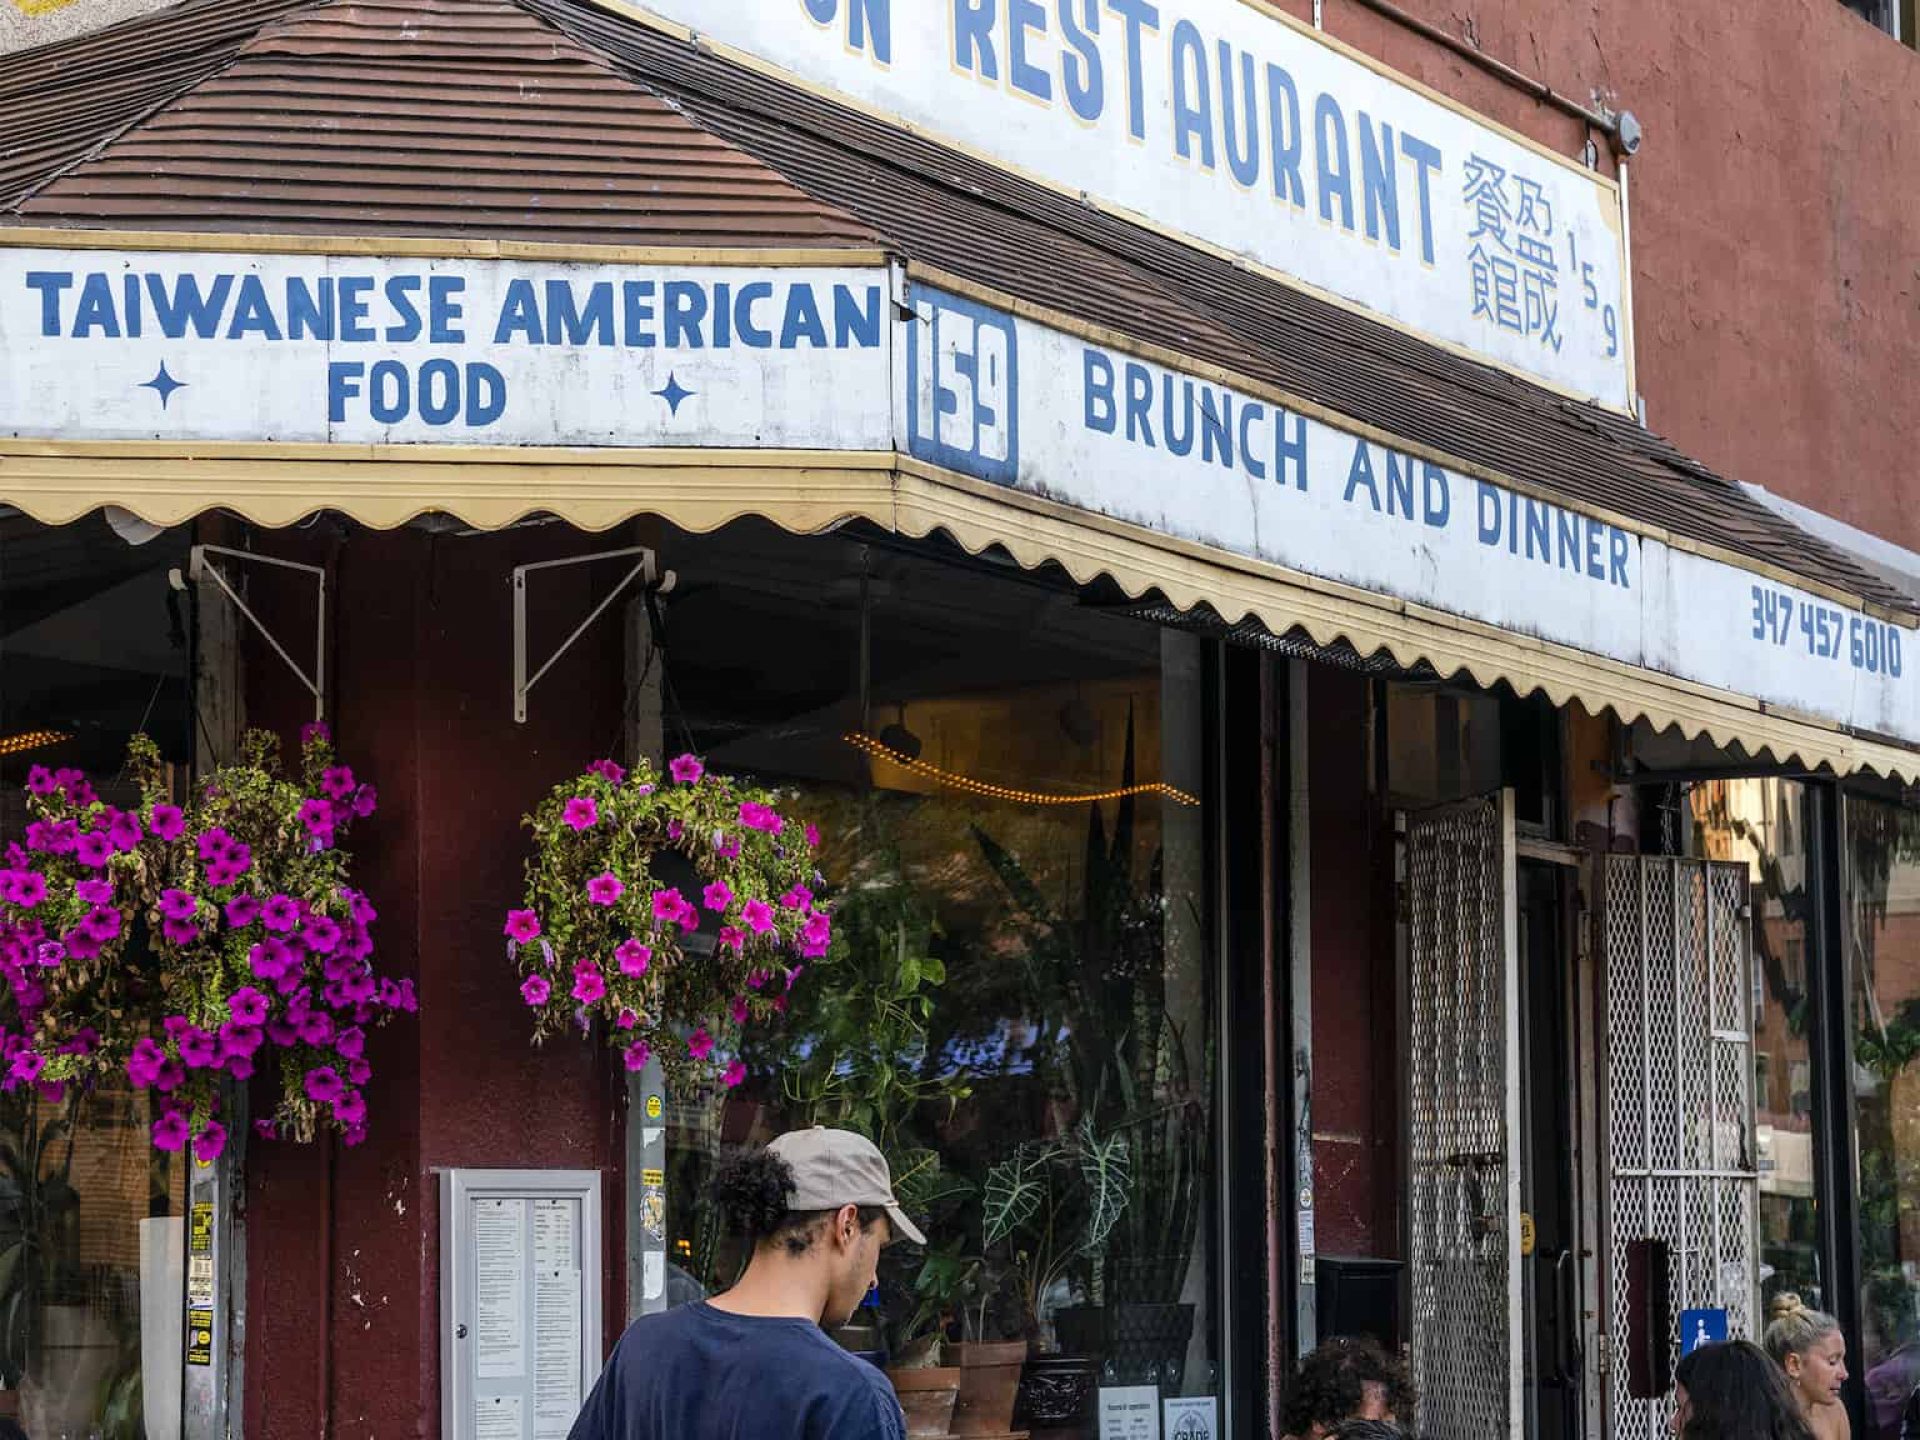 Exterior of Winson Restaurant in New York with people sitting at outdoor tables and a waiter taking someones order.